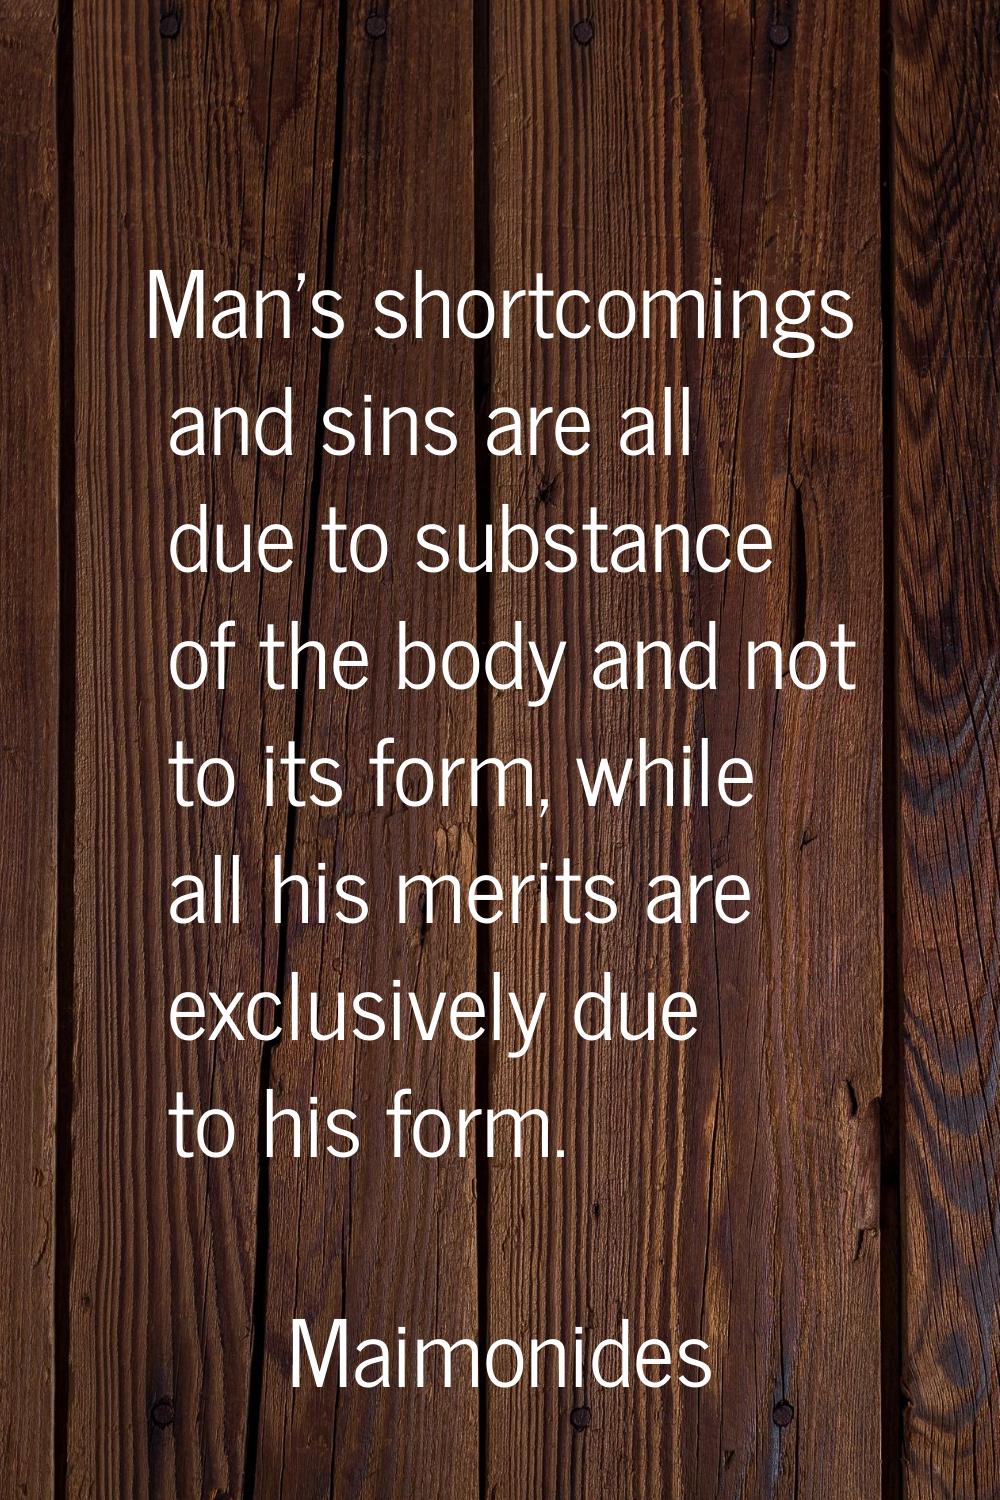 Man's shortcomings and sins are all due to substance of the body and not to its form, while all his